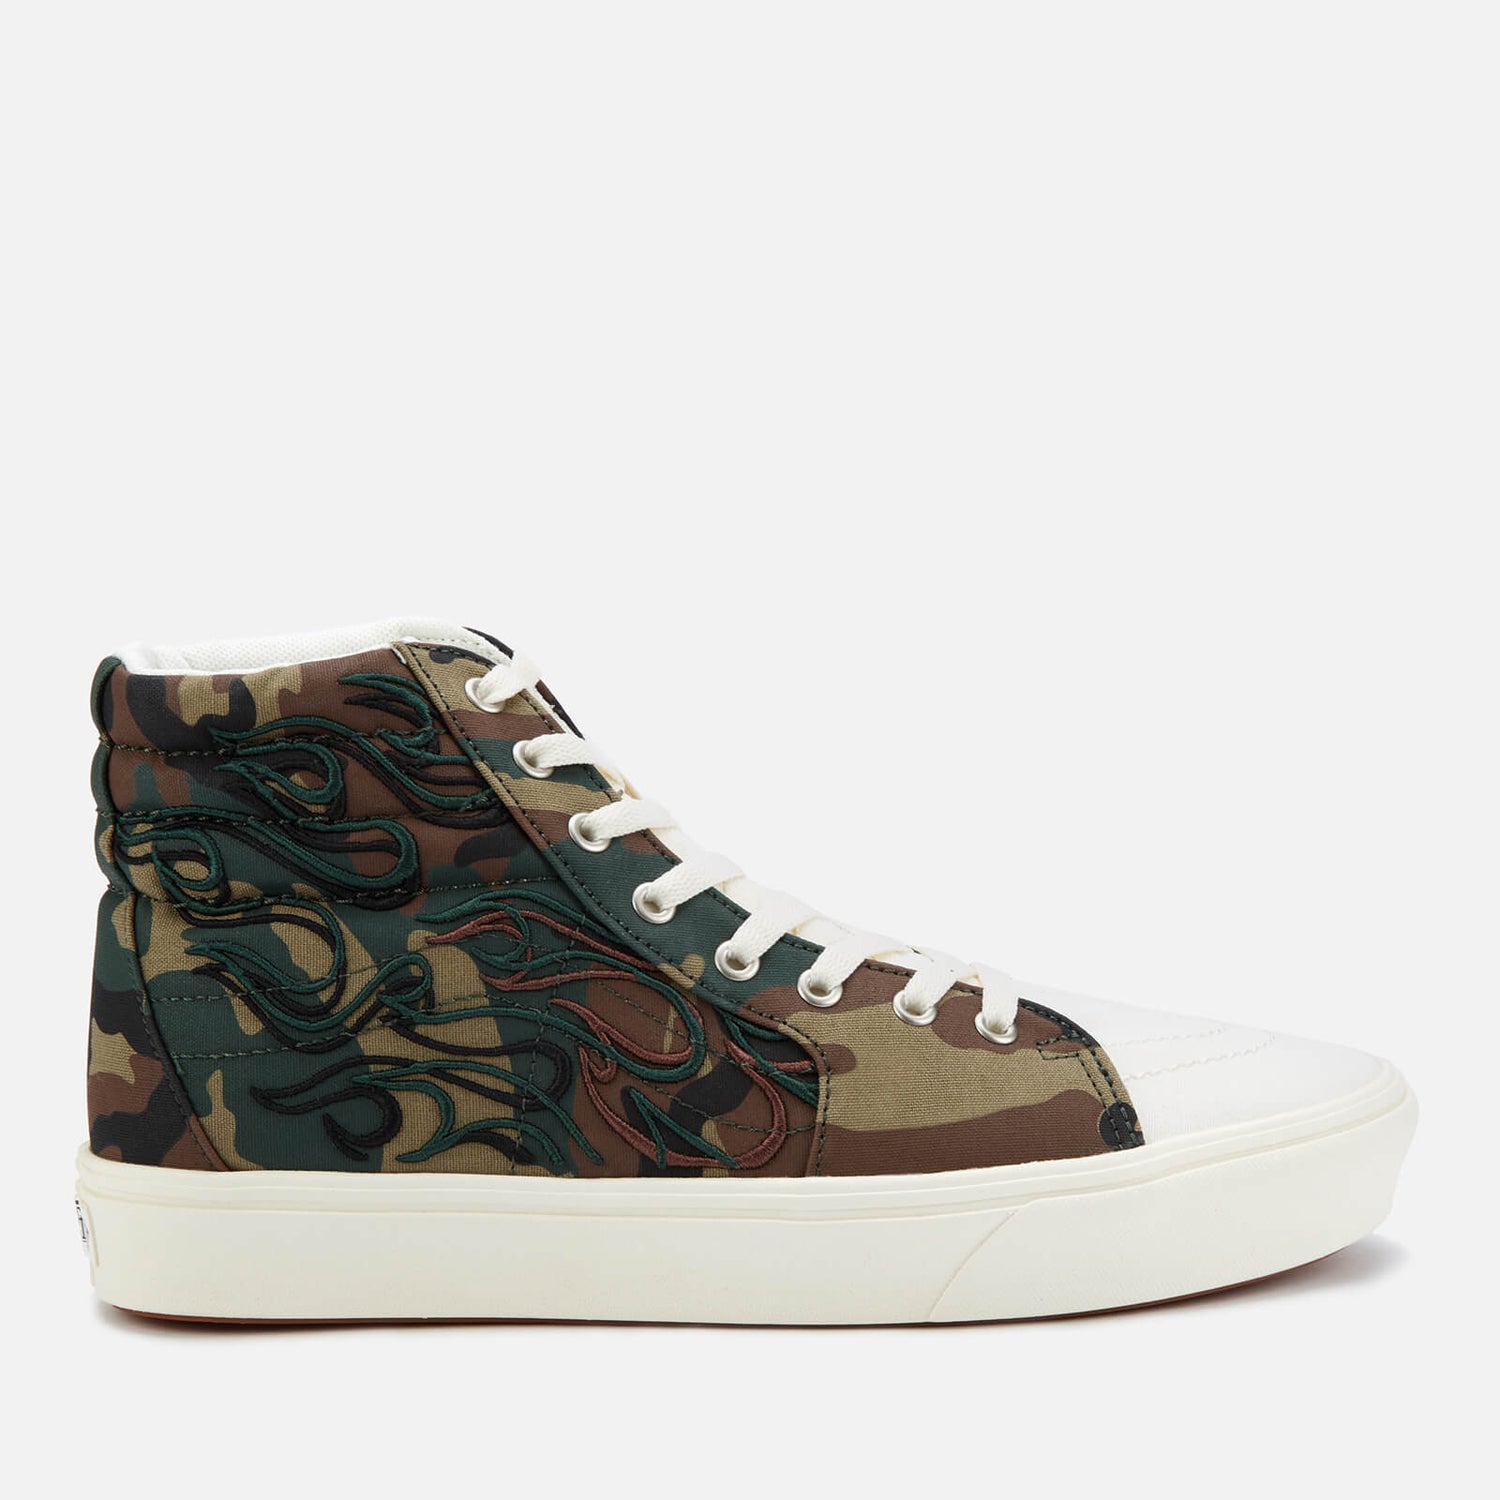 Vans Comfycush Flame Emroidery Sk8 Hi-Top Trainers - Woodland/Marshmallow